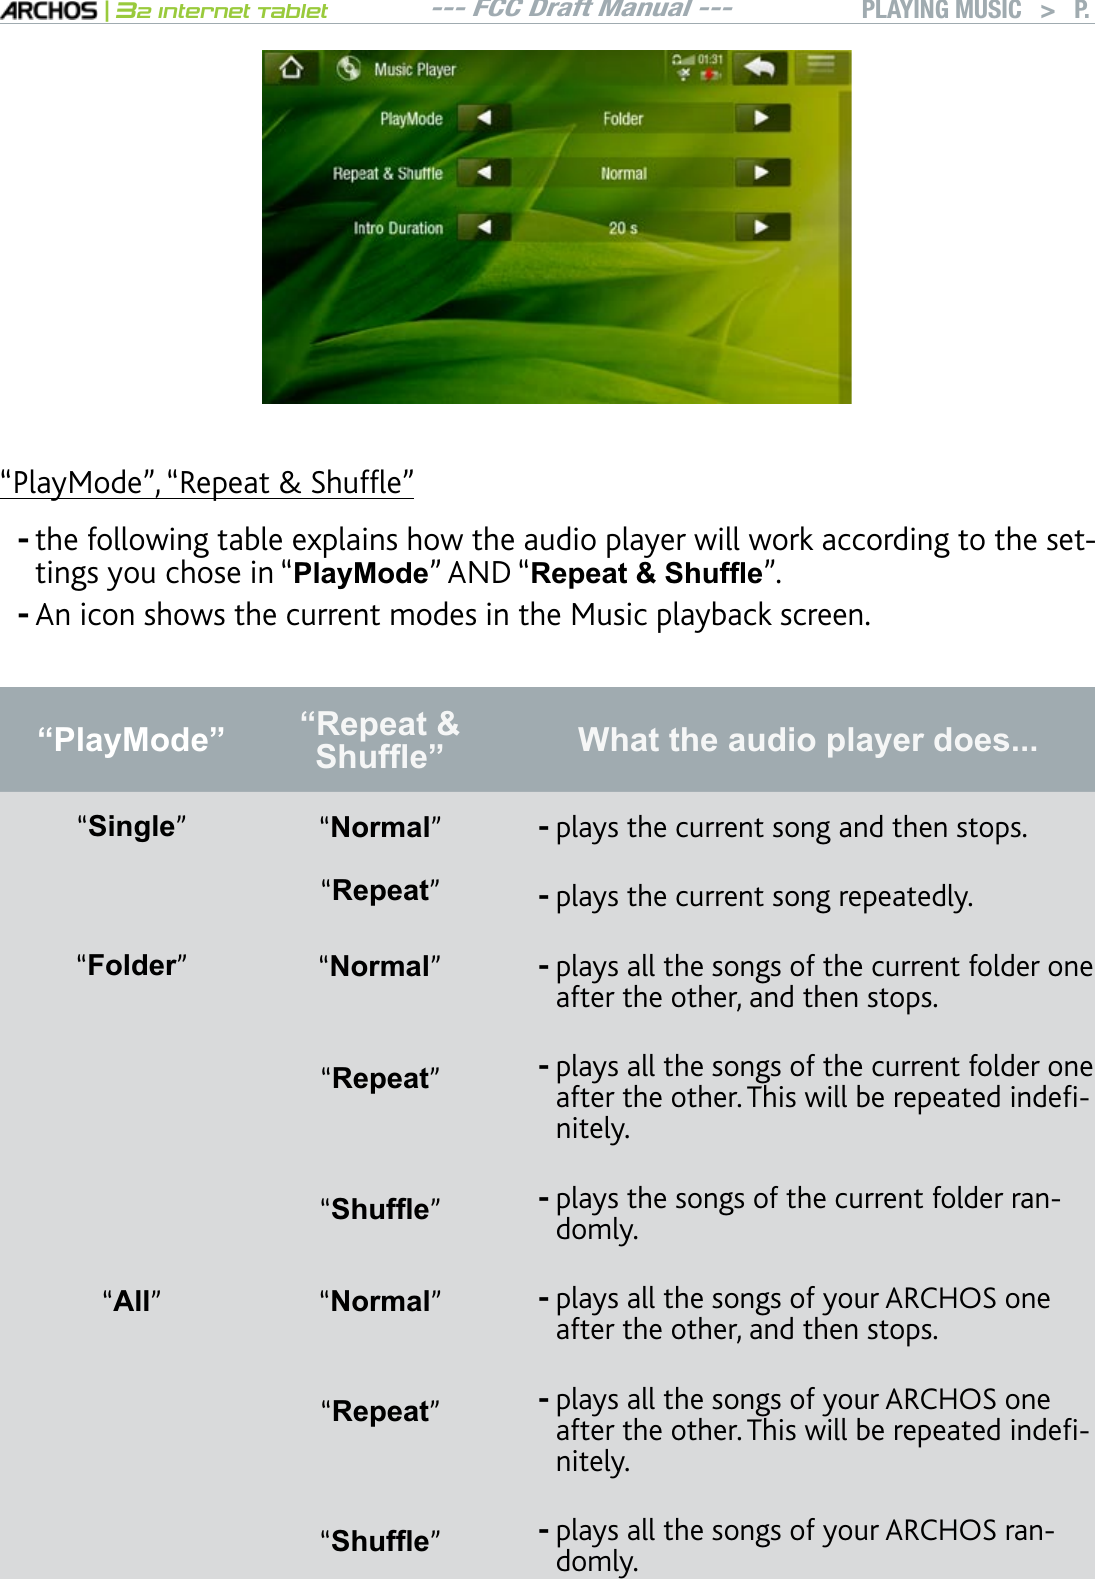 --- FCC Draft Manual ---|32 Internet TabletPLAYING MUSIC   &gt; P. 31m2NC[/QFGnm4GRGCV5JWHÓGnthe following table explains how the audio player will work according to the settings you chose in “PlayMode” AND “5HSHDW6KXIÀH”. An icon shows the current modes in the Music playback screen.“PlayMode” “Repeat &amp; 6KXIÀH´ What the audio player does...“Single”“Normal”plays the current song and then stops.-“Repeat”plays the current song repeatedly.-“Folder”“Normal”plays all the songs of the current folder one after the other, and then stops.-“Repeat”plays all the songs of the current folder one CHVGTVJGQVJGT6JKUYKNNDGTGRGCVGFKPFGÒnitely.-“6KXIÀH”plays the songs of the current folder randomly.-“All”“Normal”plays all the songs of your ARCHOS one after the other, and then stops.-“Repeat”plays all the songs of your ARCHOS one CHVGTVJGQVJGT6JKUYKNNDGTGRGCVGFKPFGÒnitely.-“6KXIÀH”plays all the songs of your ARCHOS randomly.---